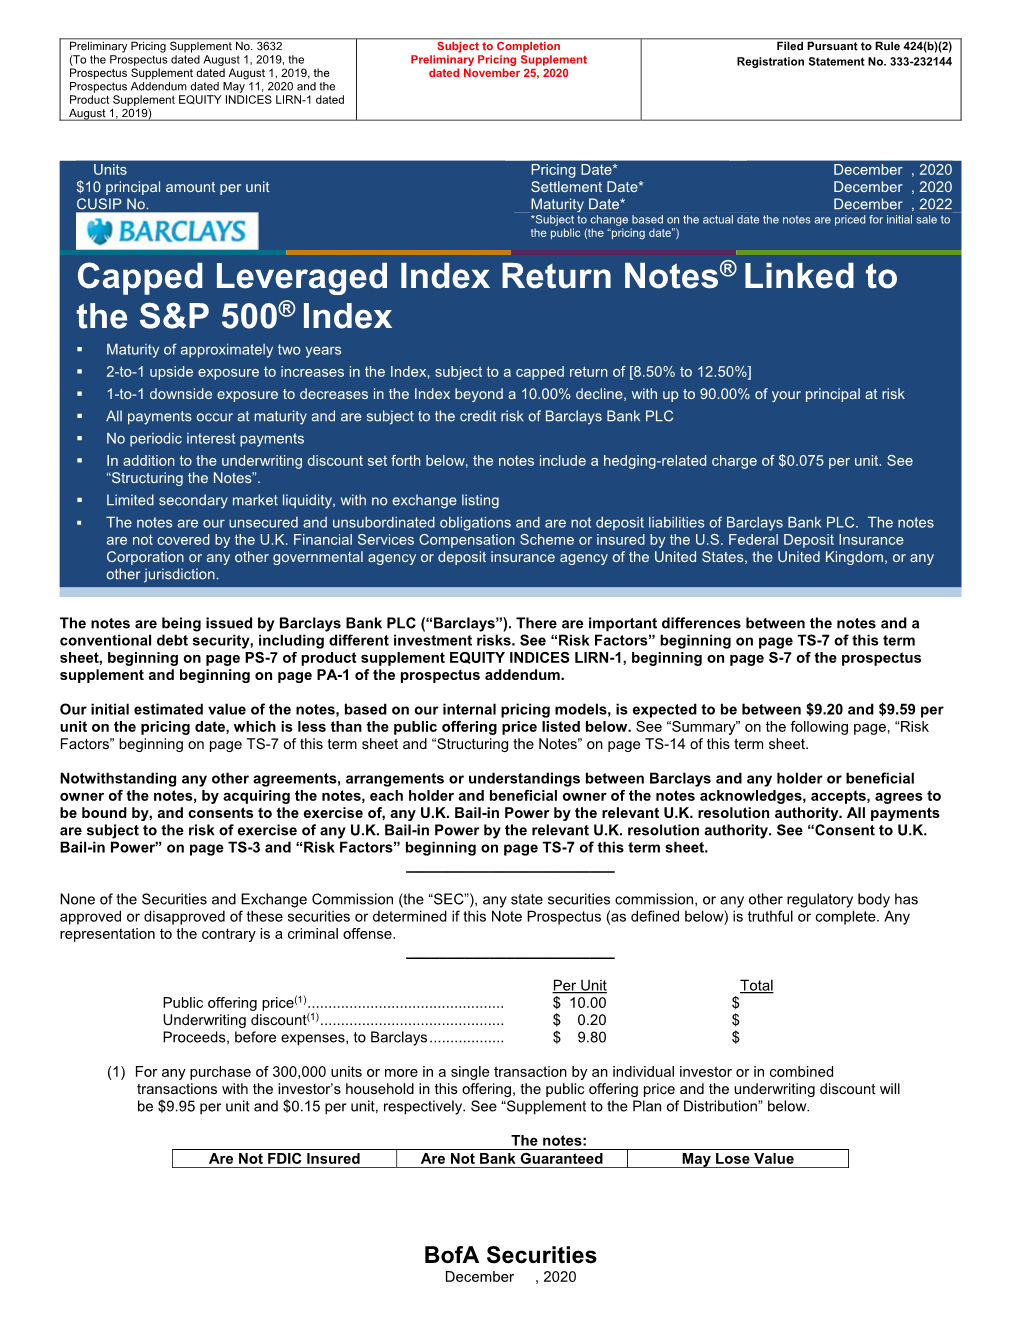 Capped Leveraged Index Return Notes® Linked to the S&P 500® Index